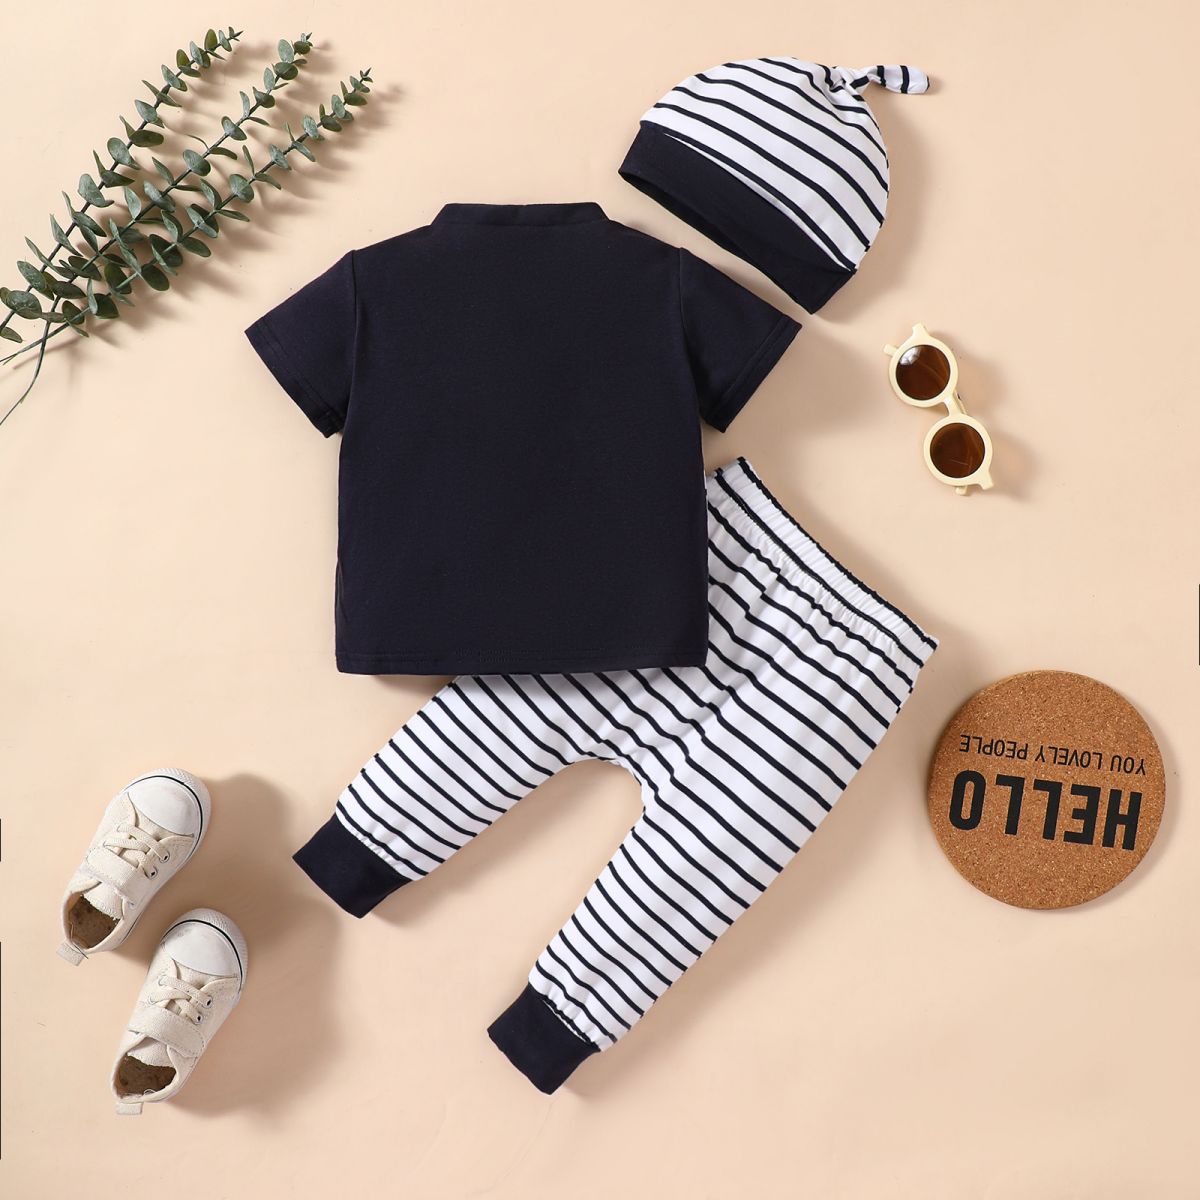 Children’s Boys Elephant Graphic Top and Striped Pants Set